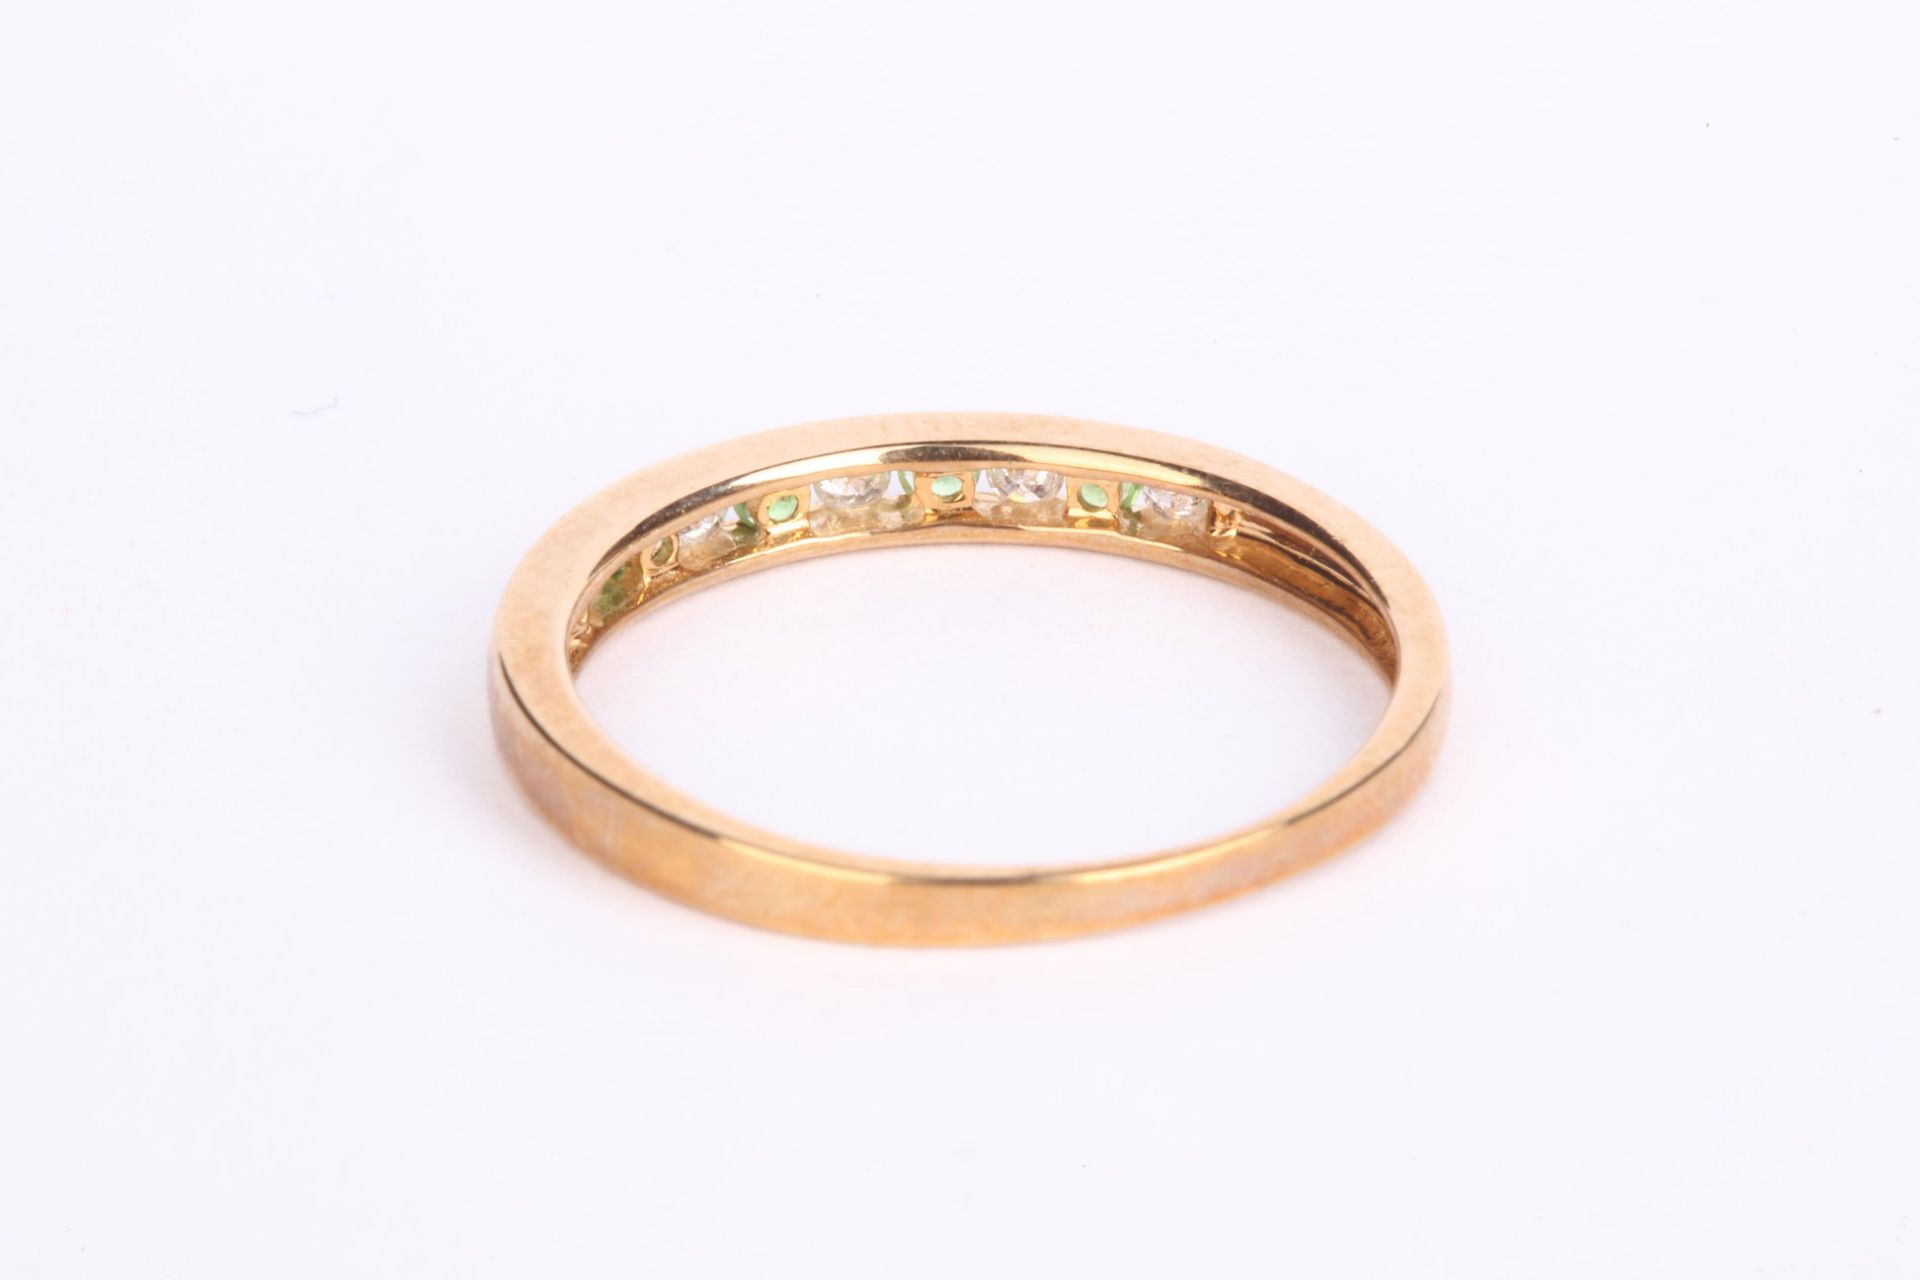 + VAT Ladies 9ct Yellow Gold Emerald and Diamond Eternity Ring Set With 5 Emeralds and 6 Diamonds - Image 2 of 2